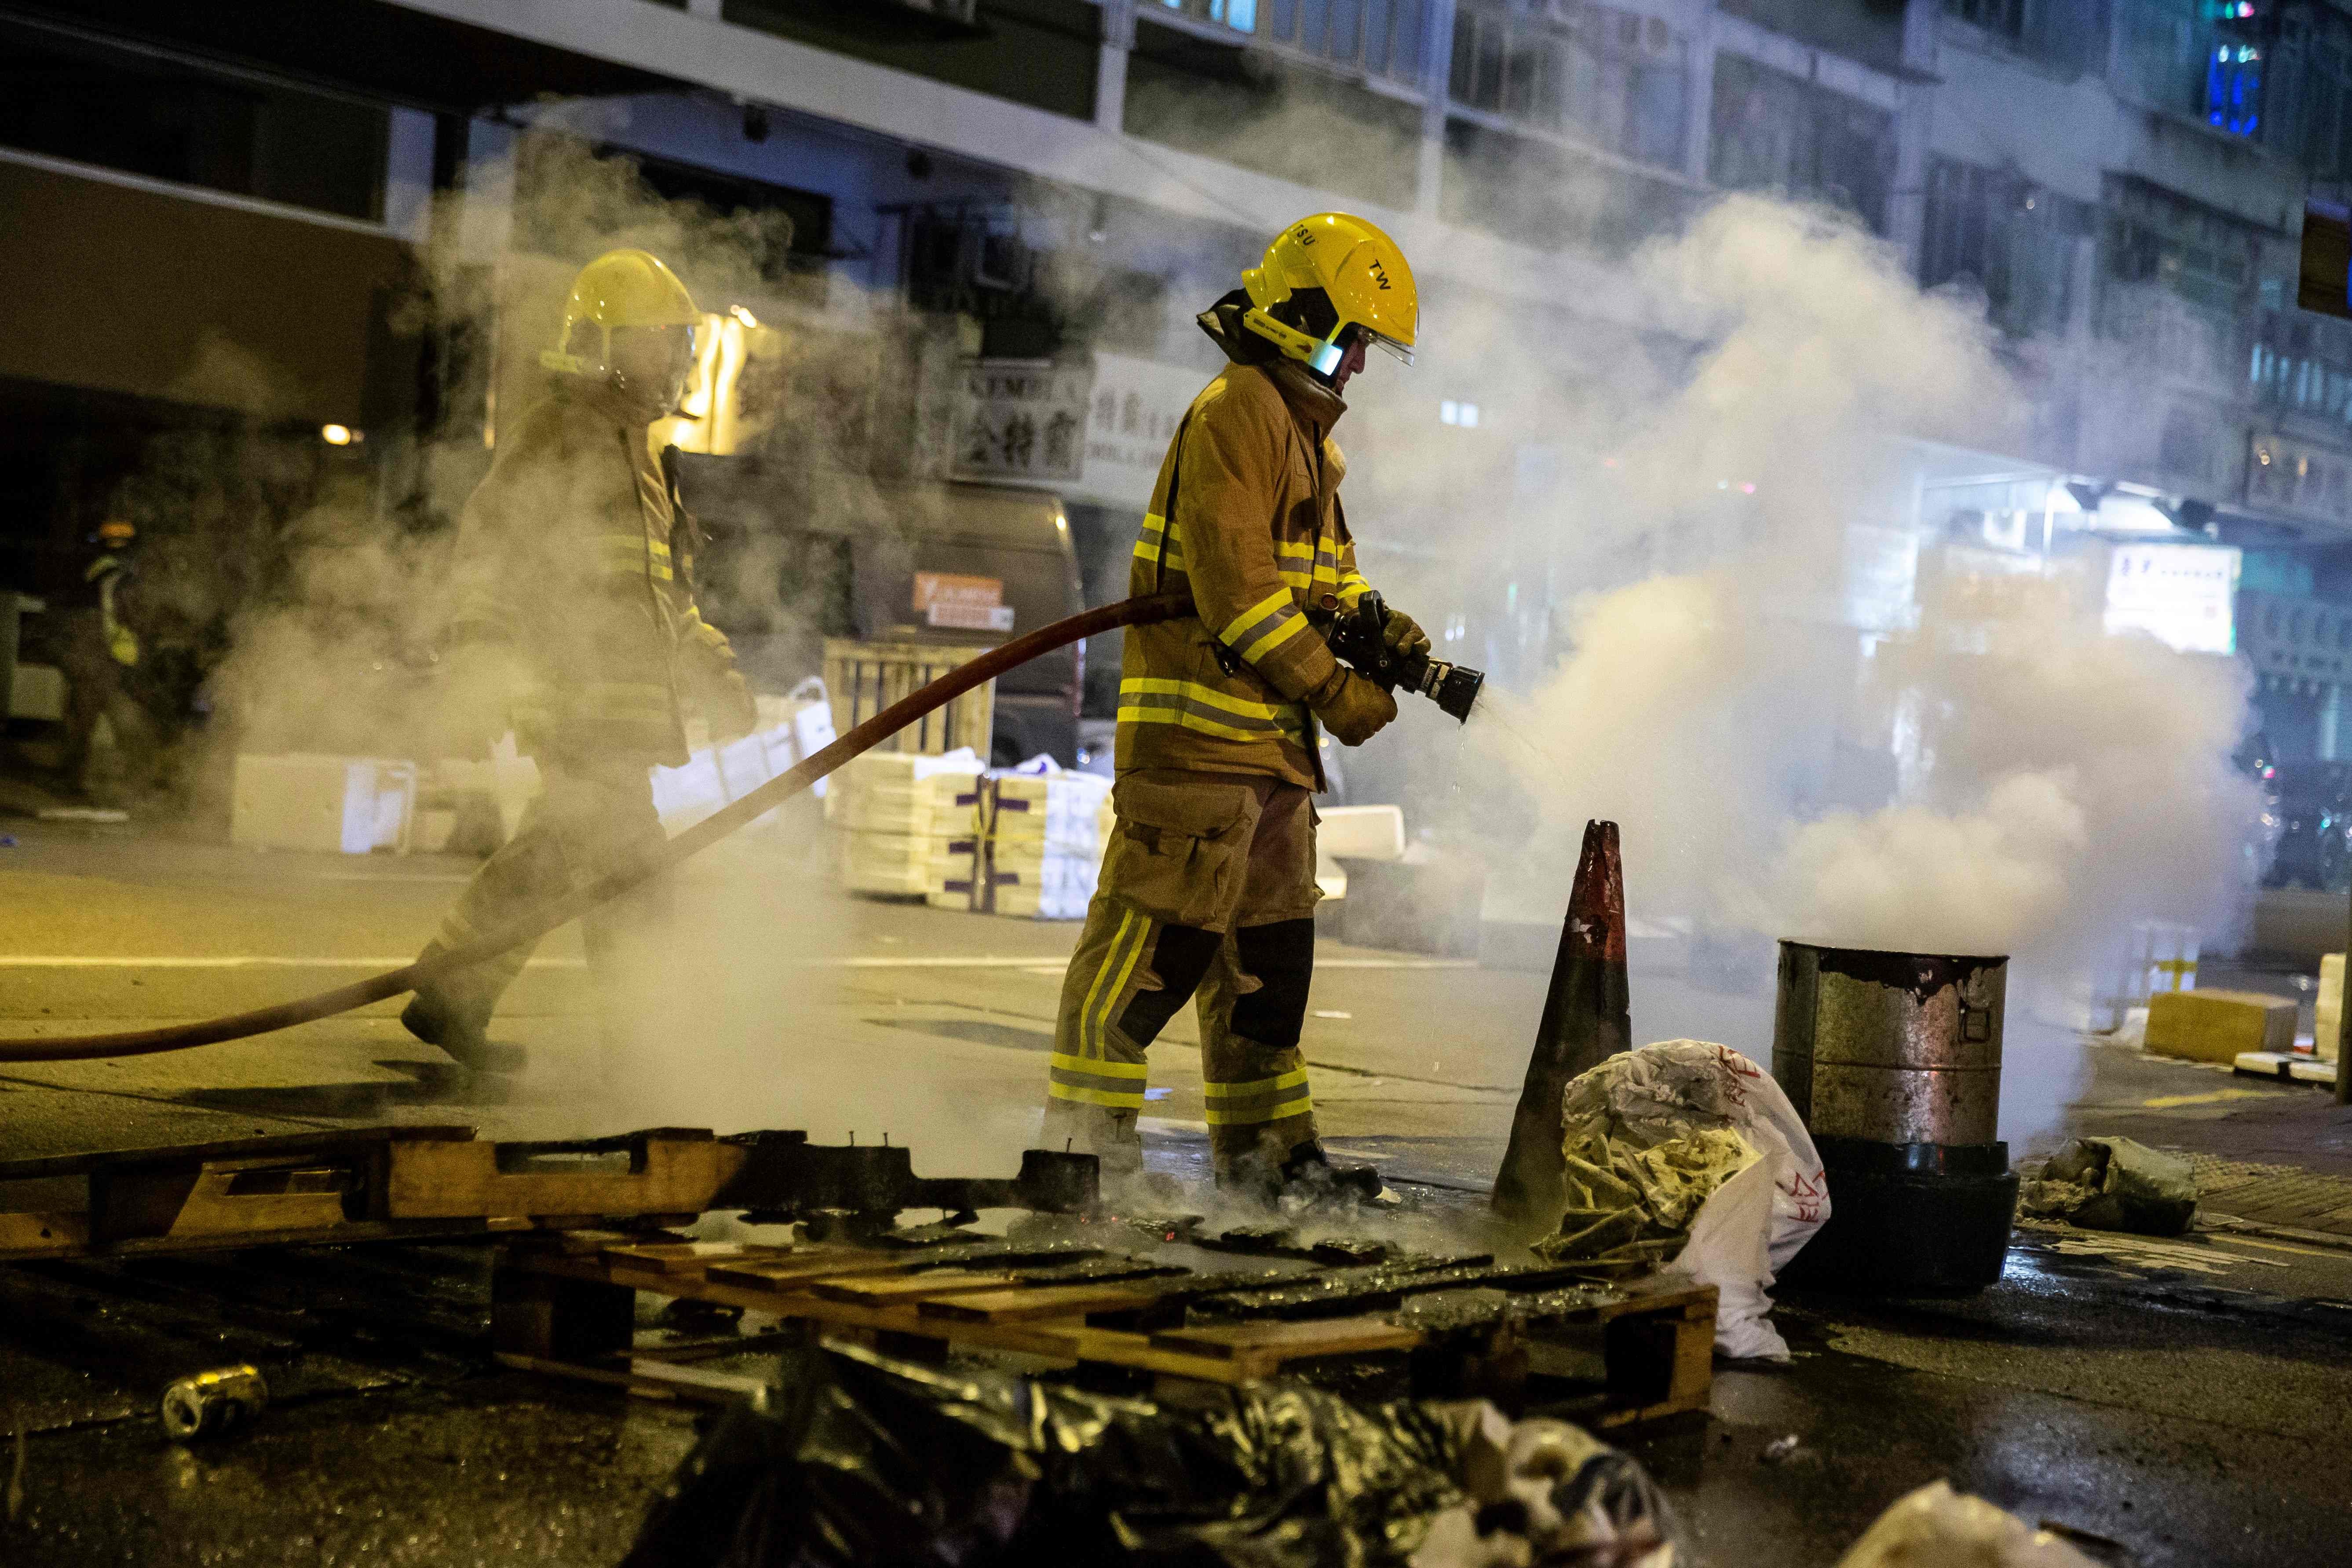 A firefighter puts out a fire started by protesters in Kowloon on December 31. Photo: AFP